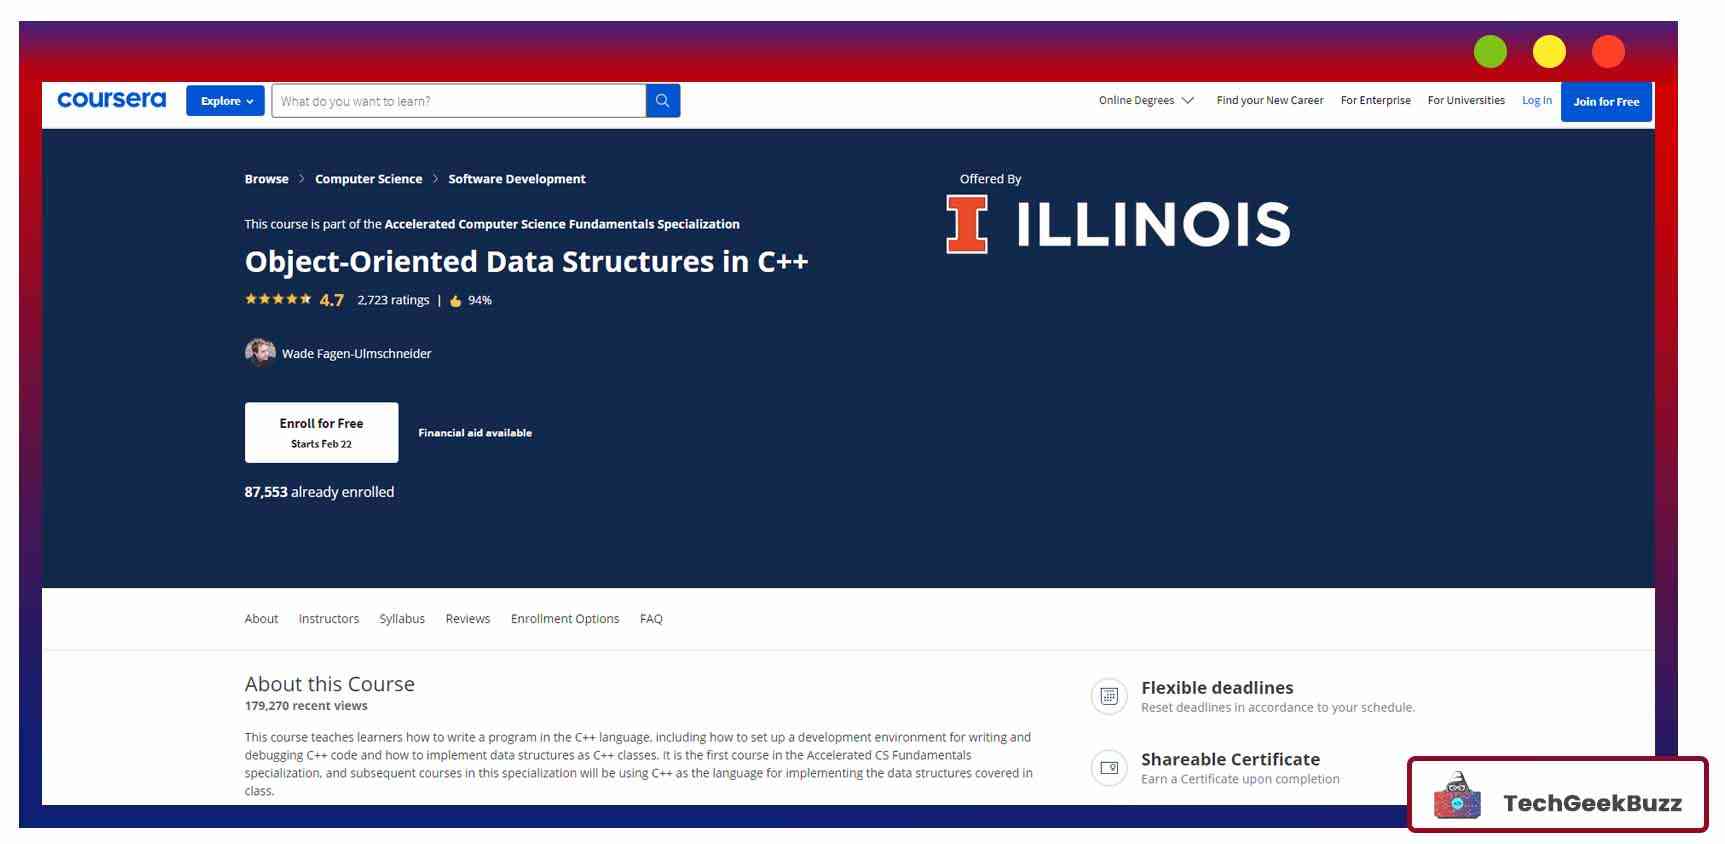 Object-Oriented Data Structures in C++ by University of Illinois